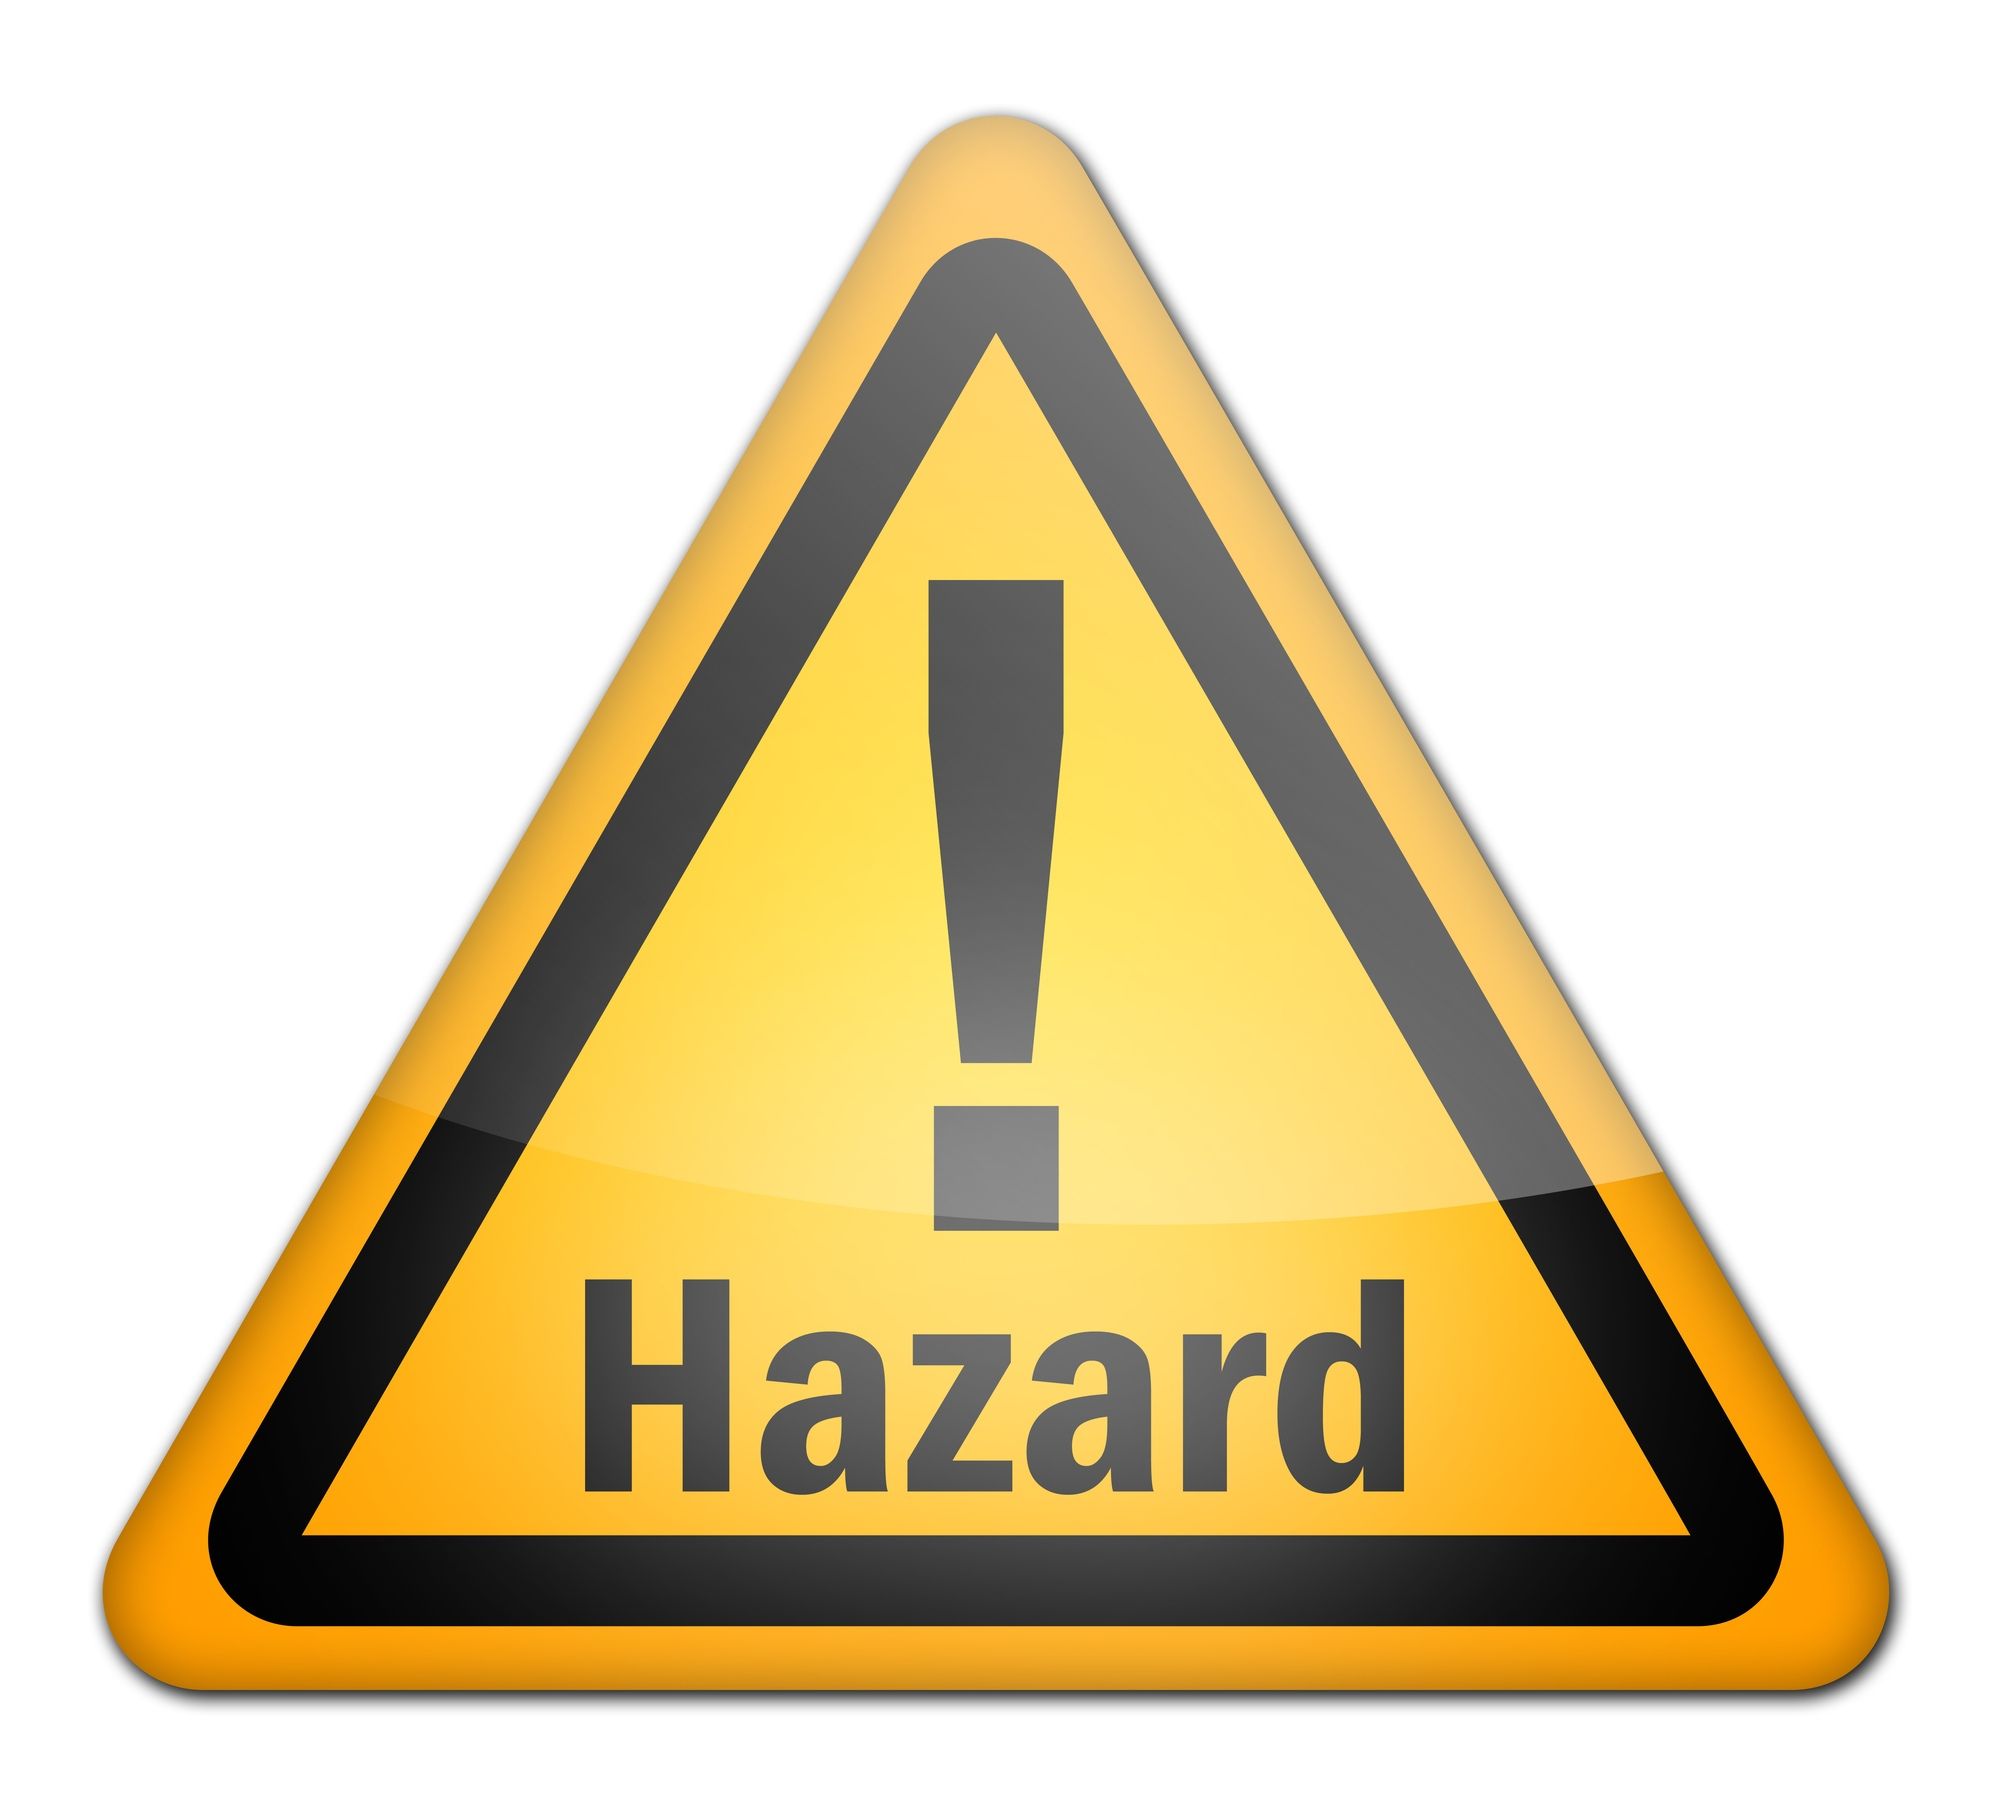 Hazardous Consumer Products Recalled Top Class Actions Canada